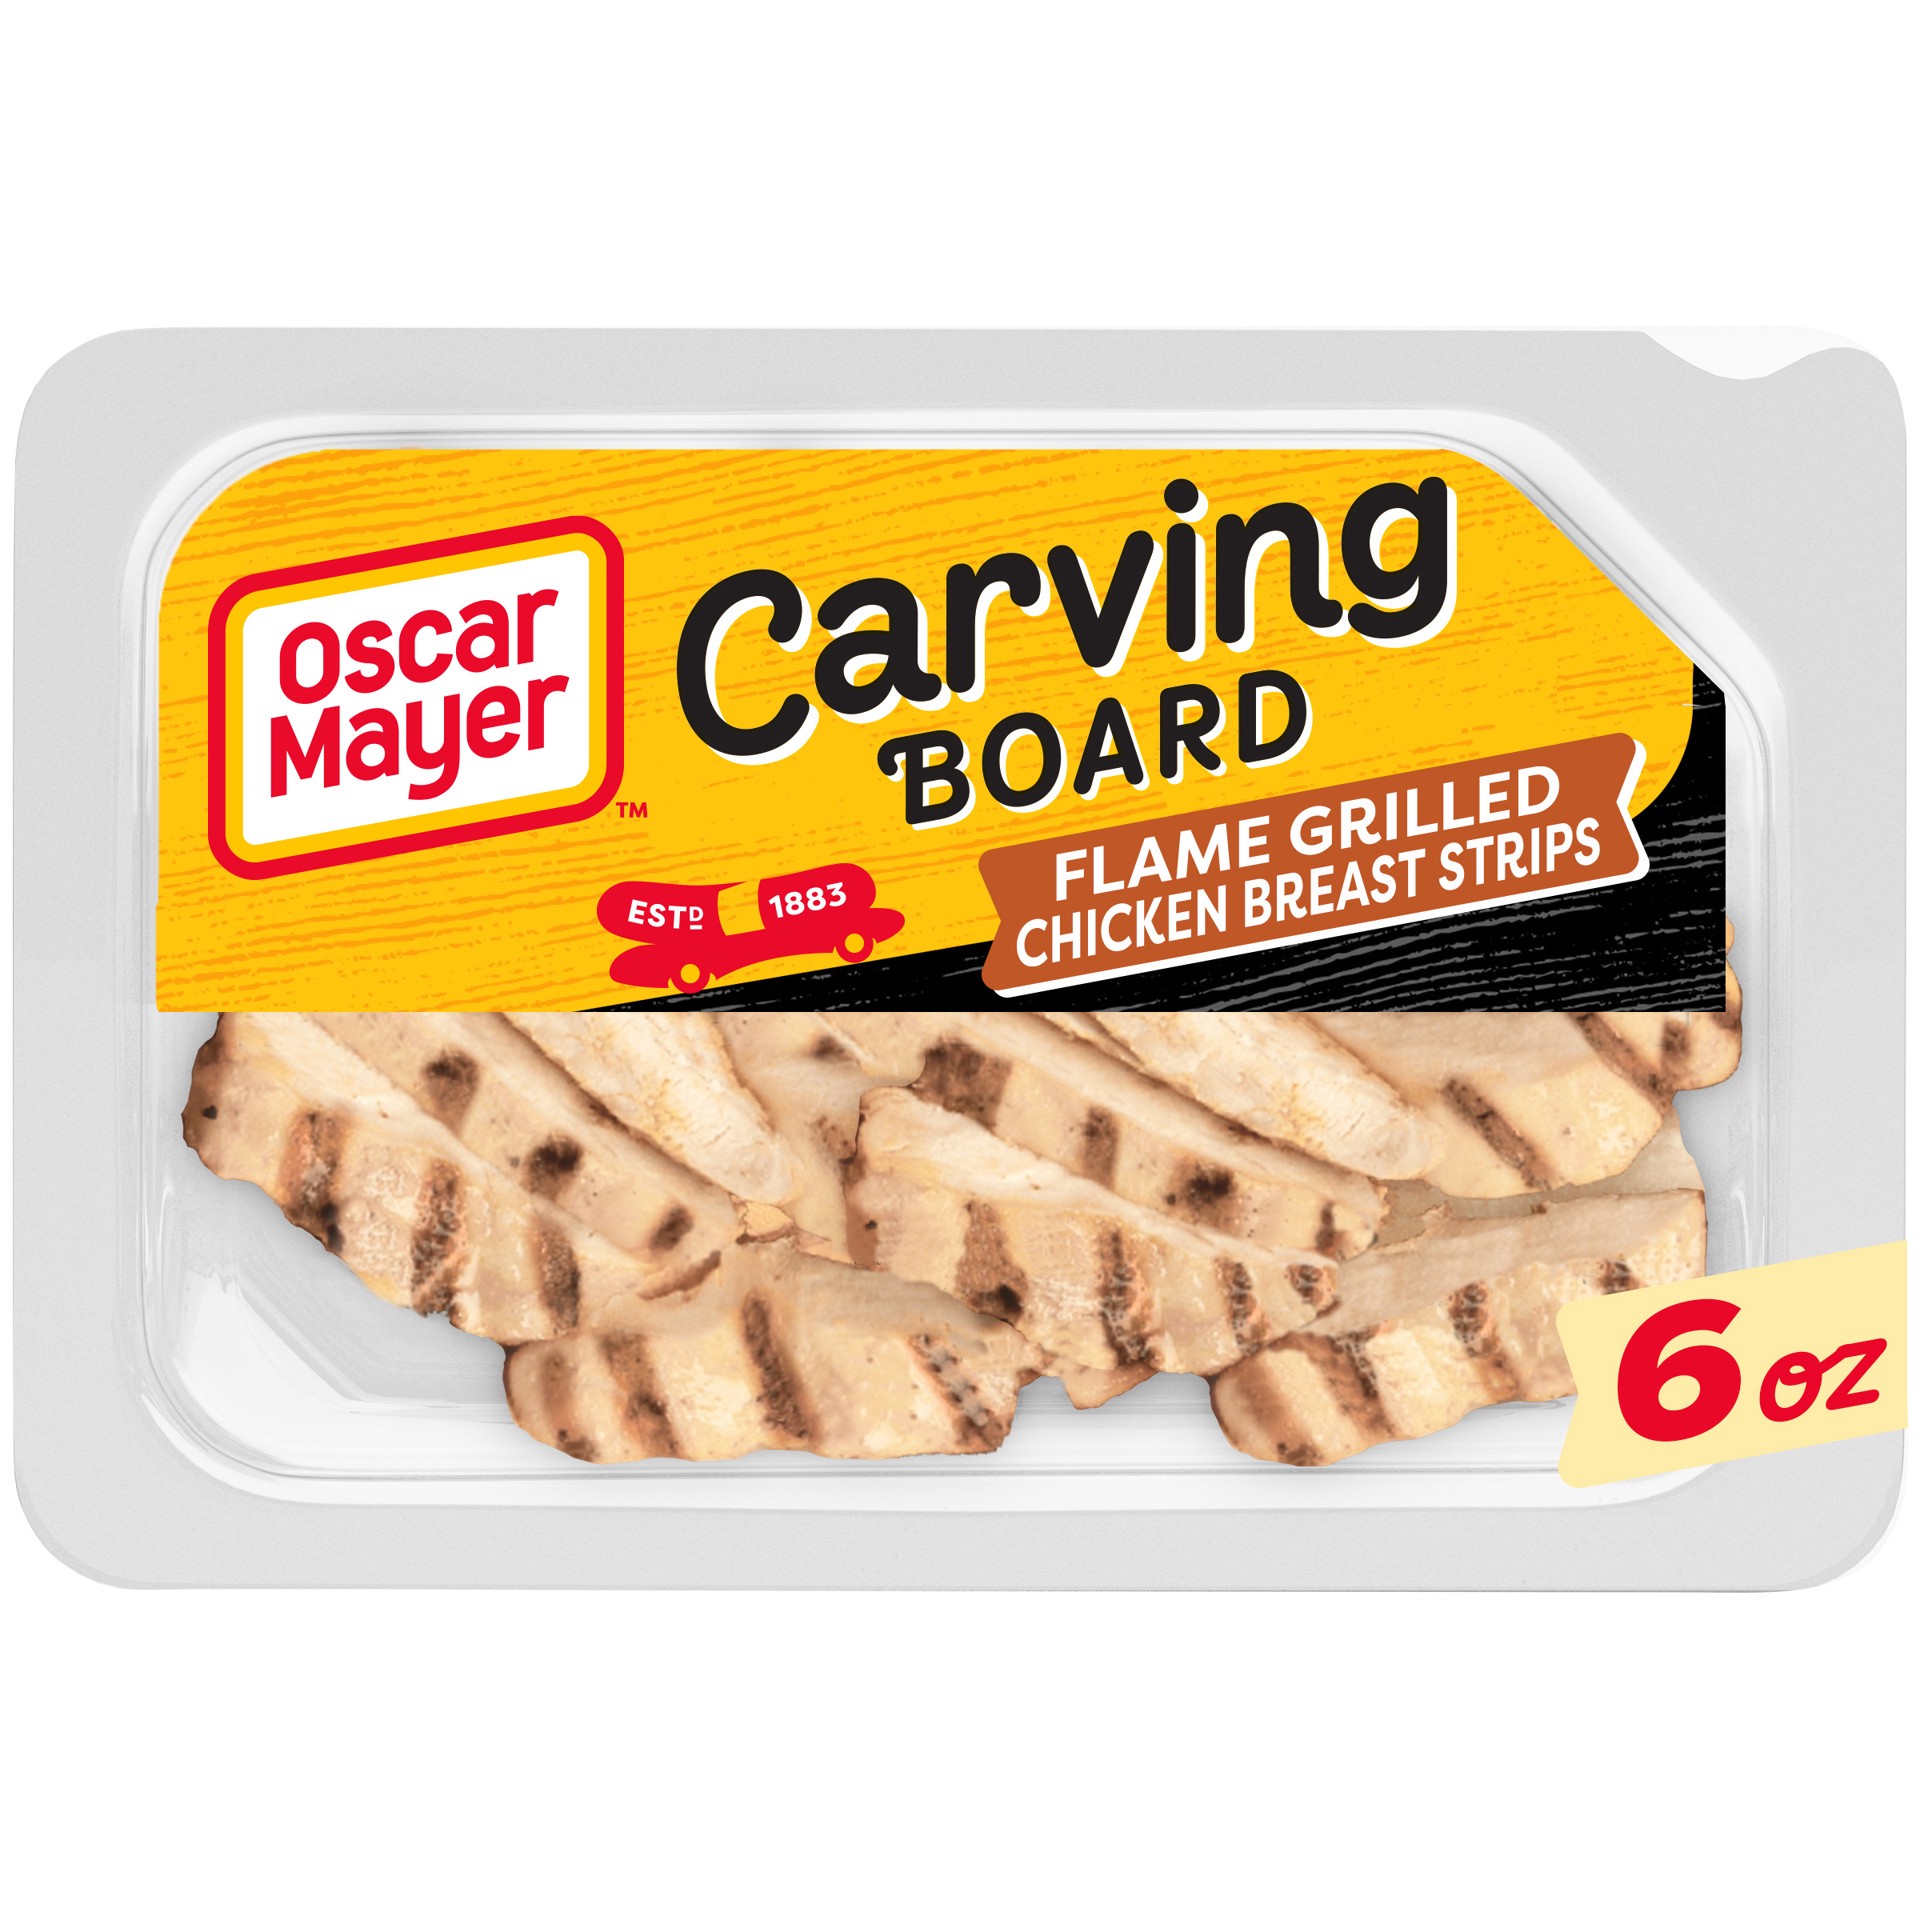 slide 1 of 9, Oscar Mayer Carving Board Flame Grilled Chicken Breast Strips Lunch Meat, 6 oz. Tray, 6 oz